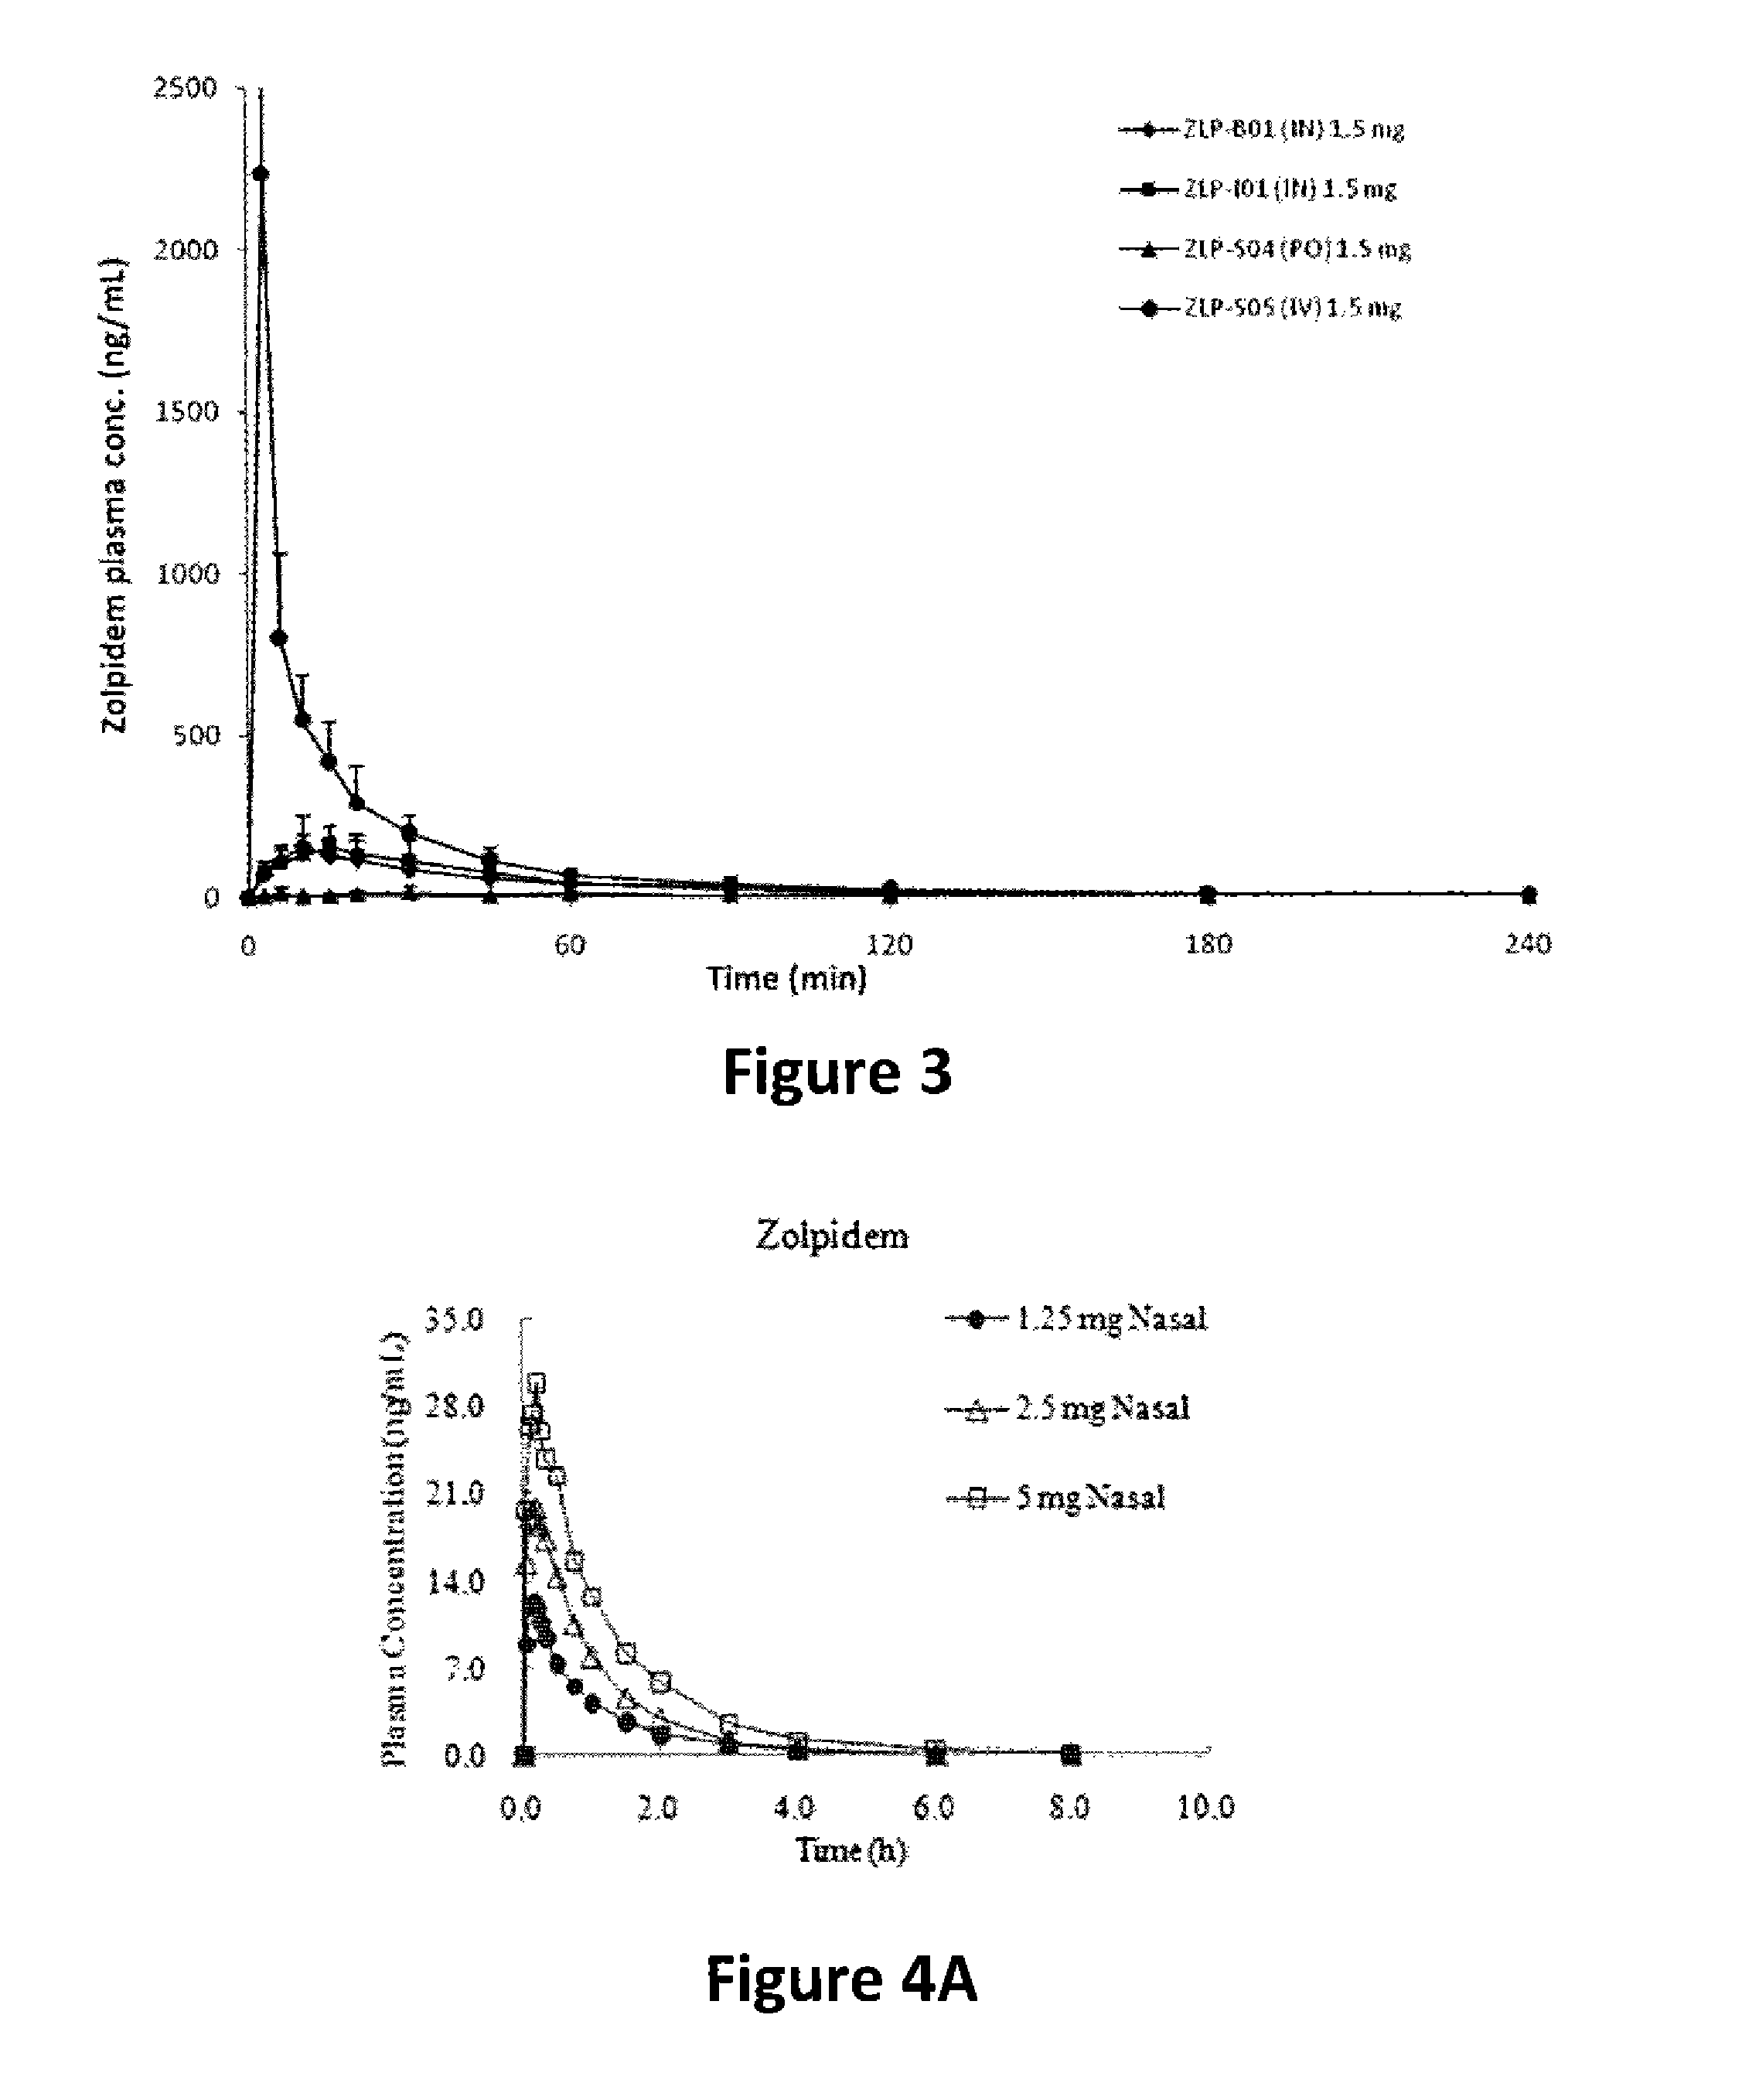 Therapeutic compositions for intranasal administration of zolpidem